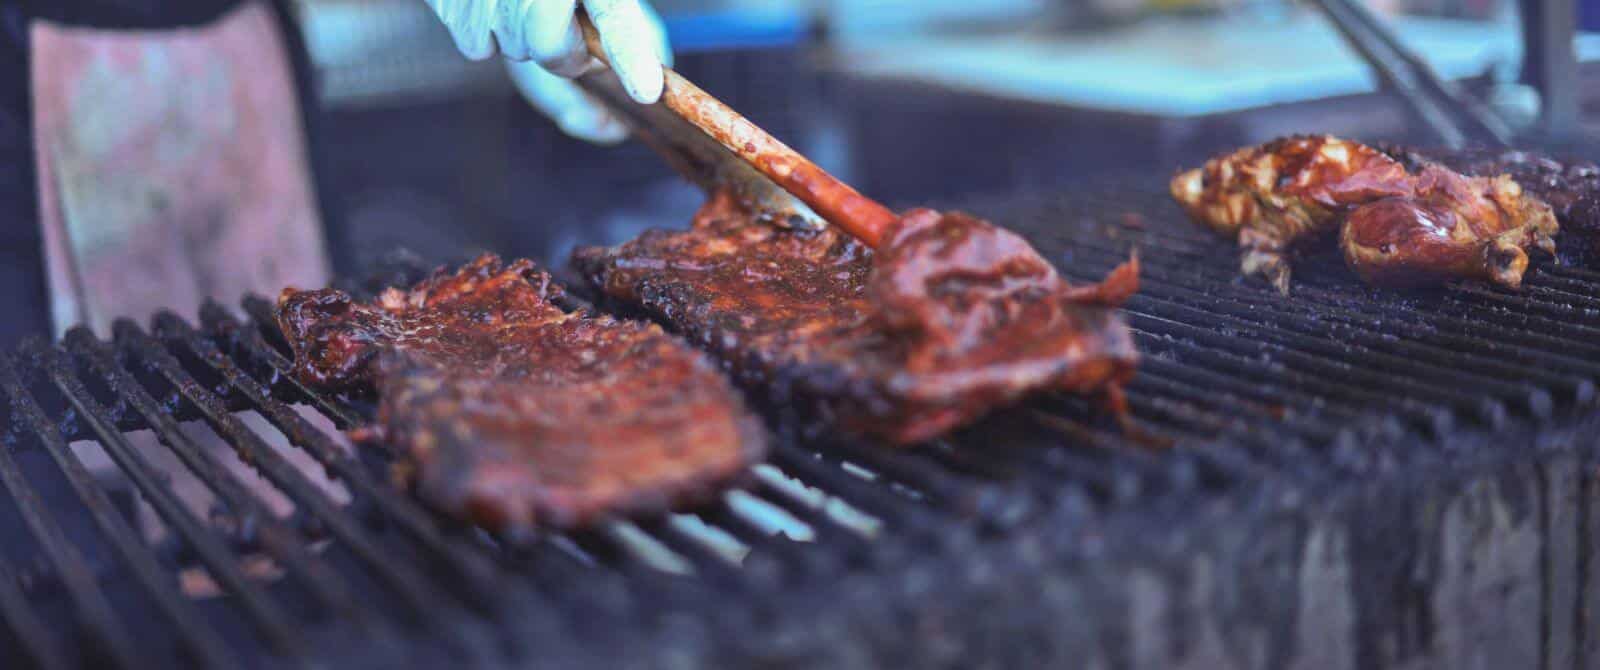 ribs on a BBQ grill with someone spreading sauce over them